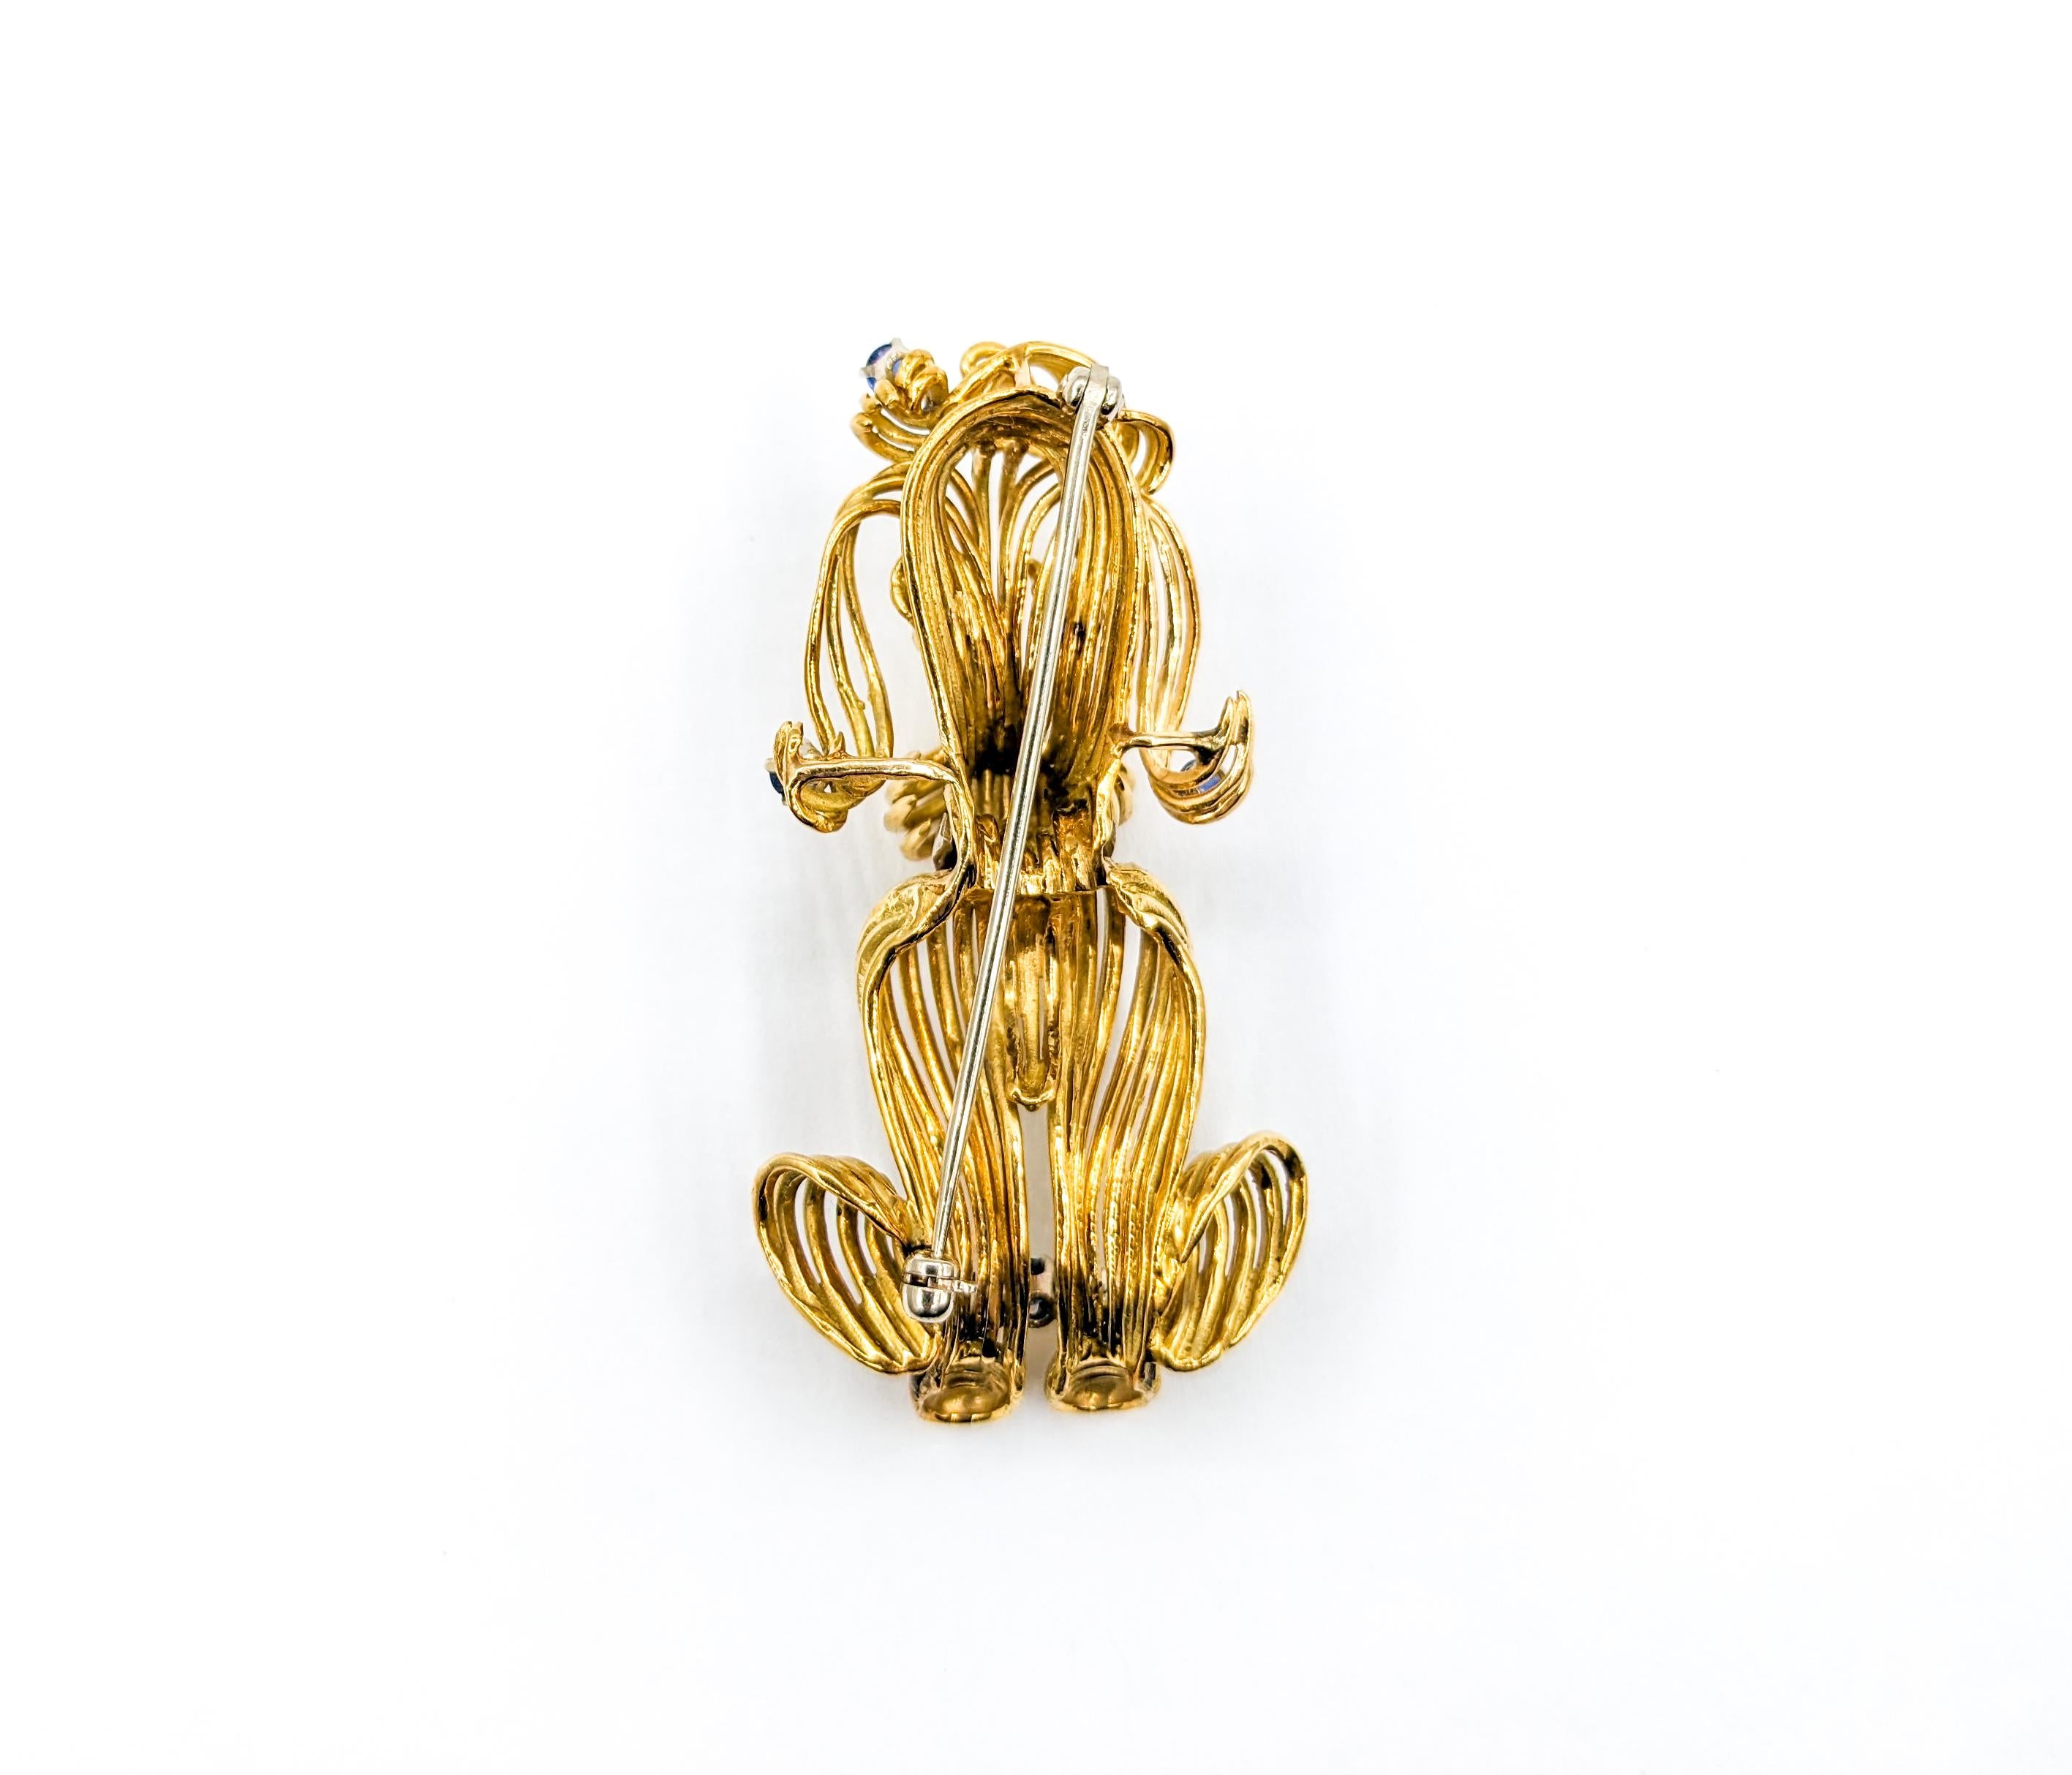 Darling Mid-Century Poodle Dog Brooch with Sapphires, Ruby & Diamonds 18K In Excellent Condition For Sale In Bloomington, MN